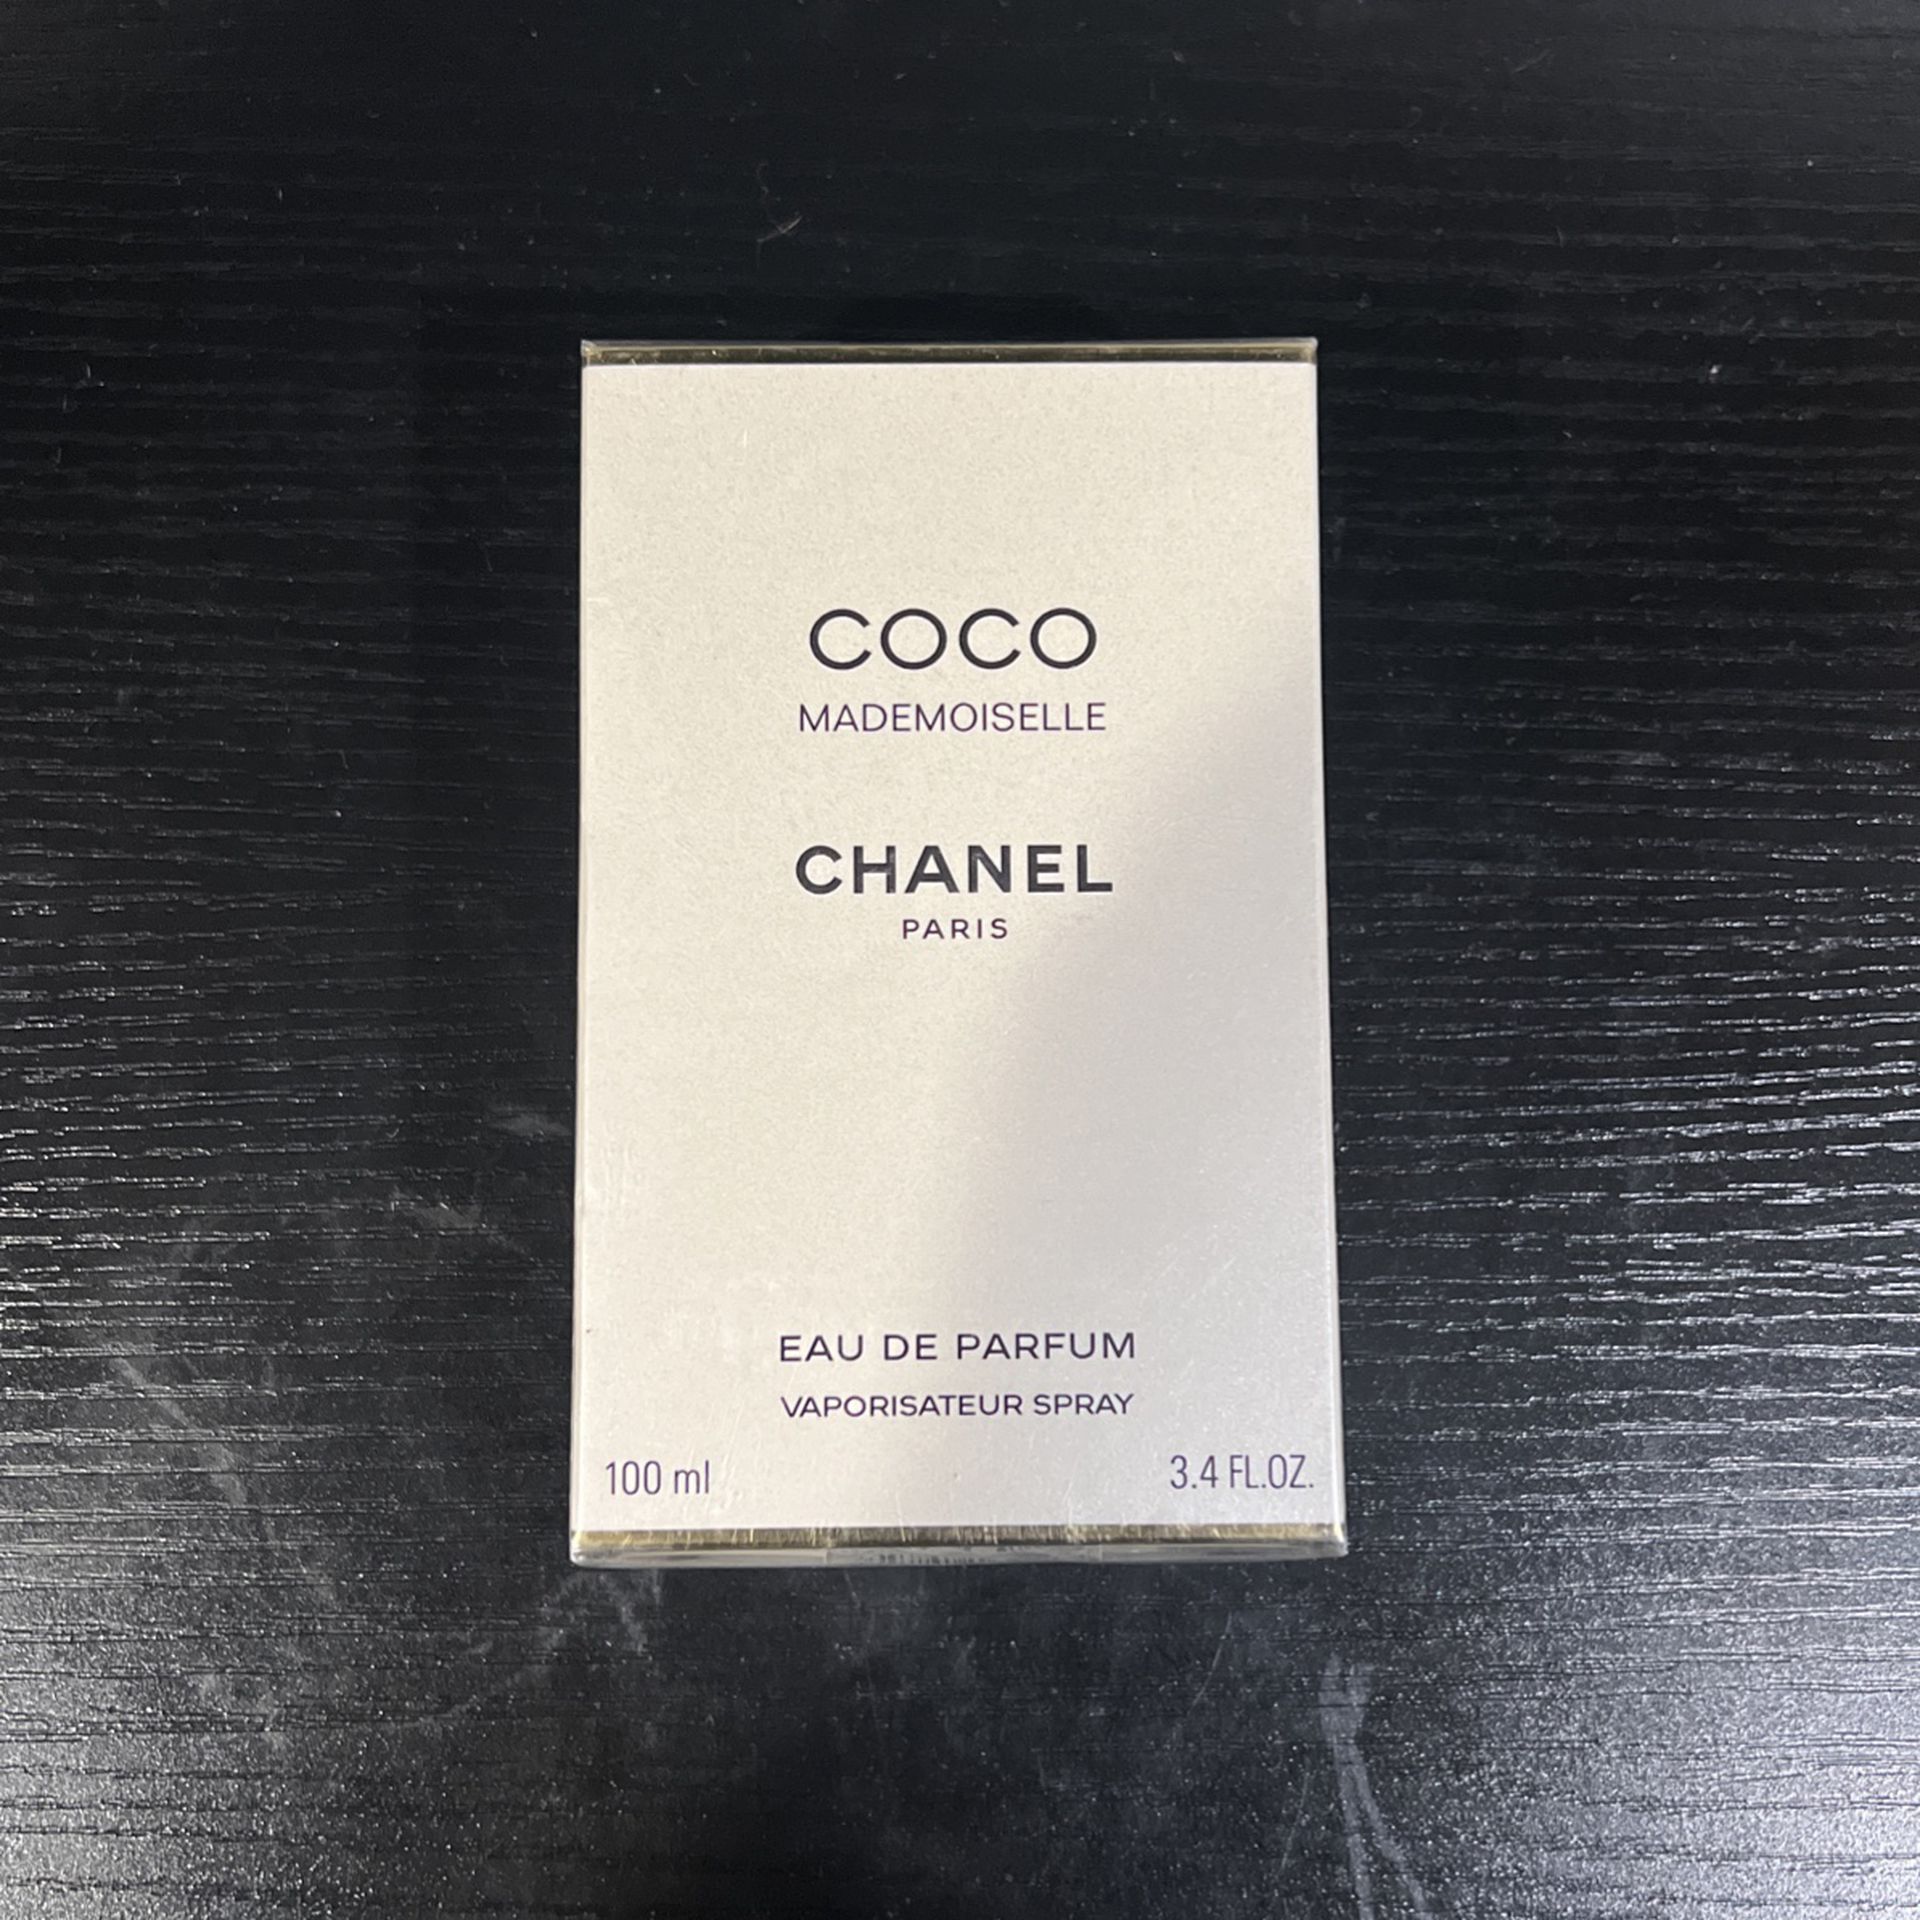 skak Rendezvous Bliver værre Chanel Coco Mademoiselle for Sale in Chicago, IL - OfferUp